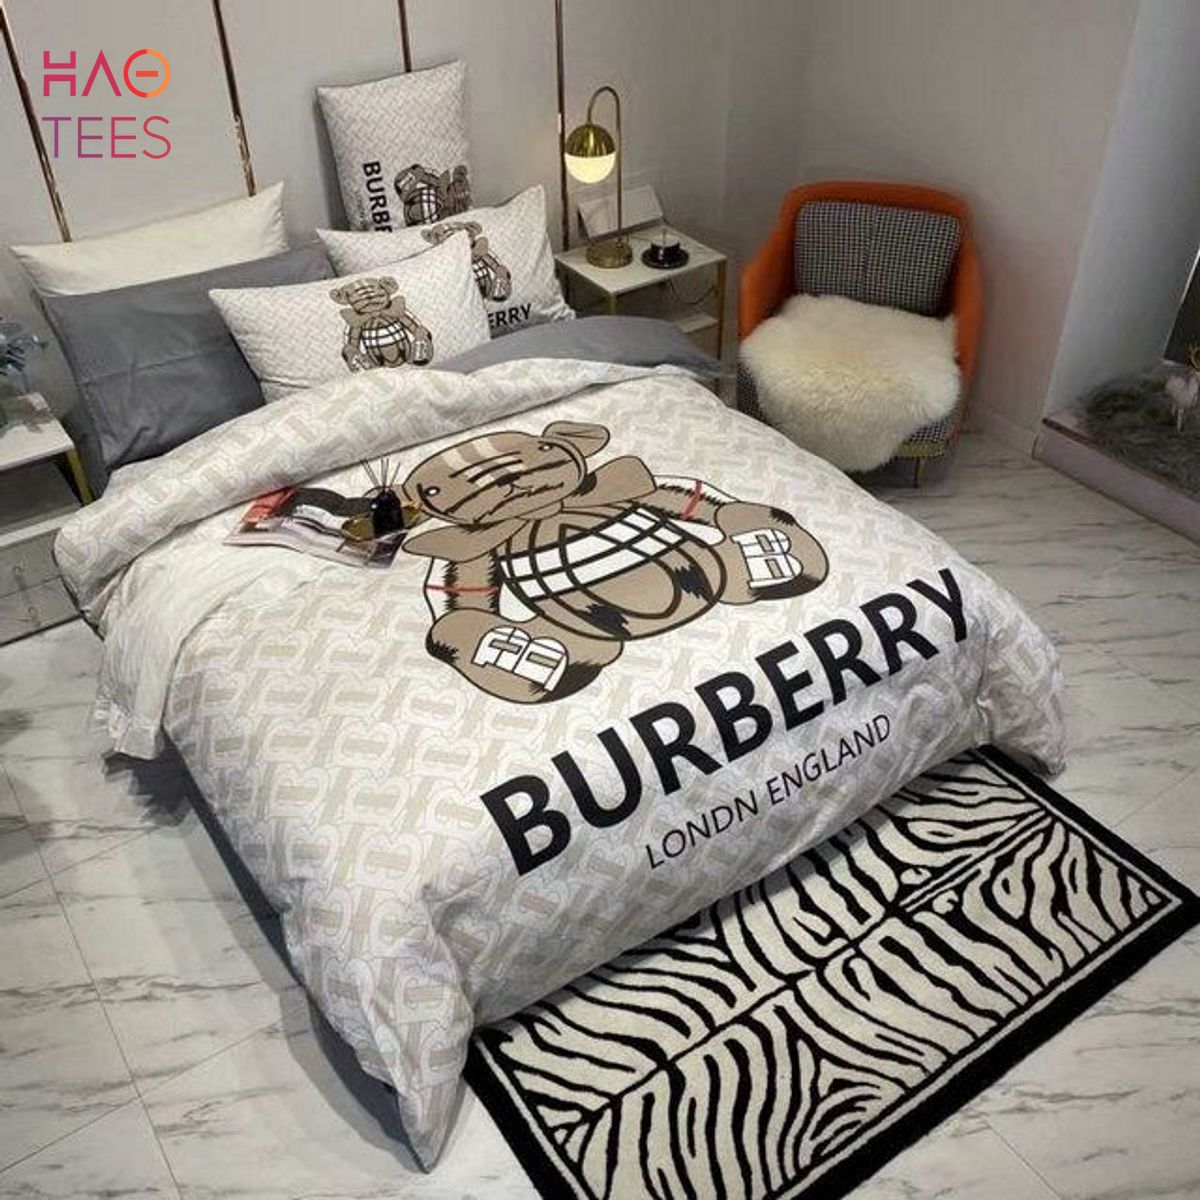 [BEST] Burberry London England Bear Luxury Brand Inspired 3D Personalized Customized Bedding Sets